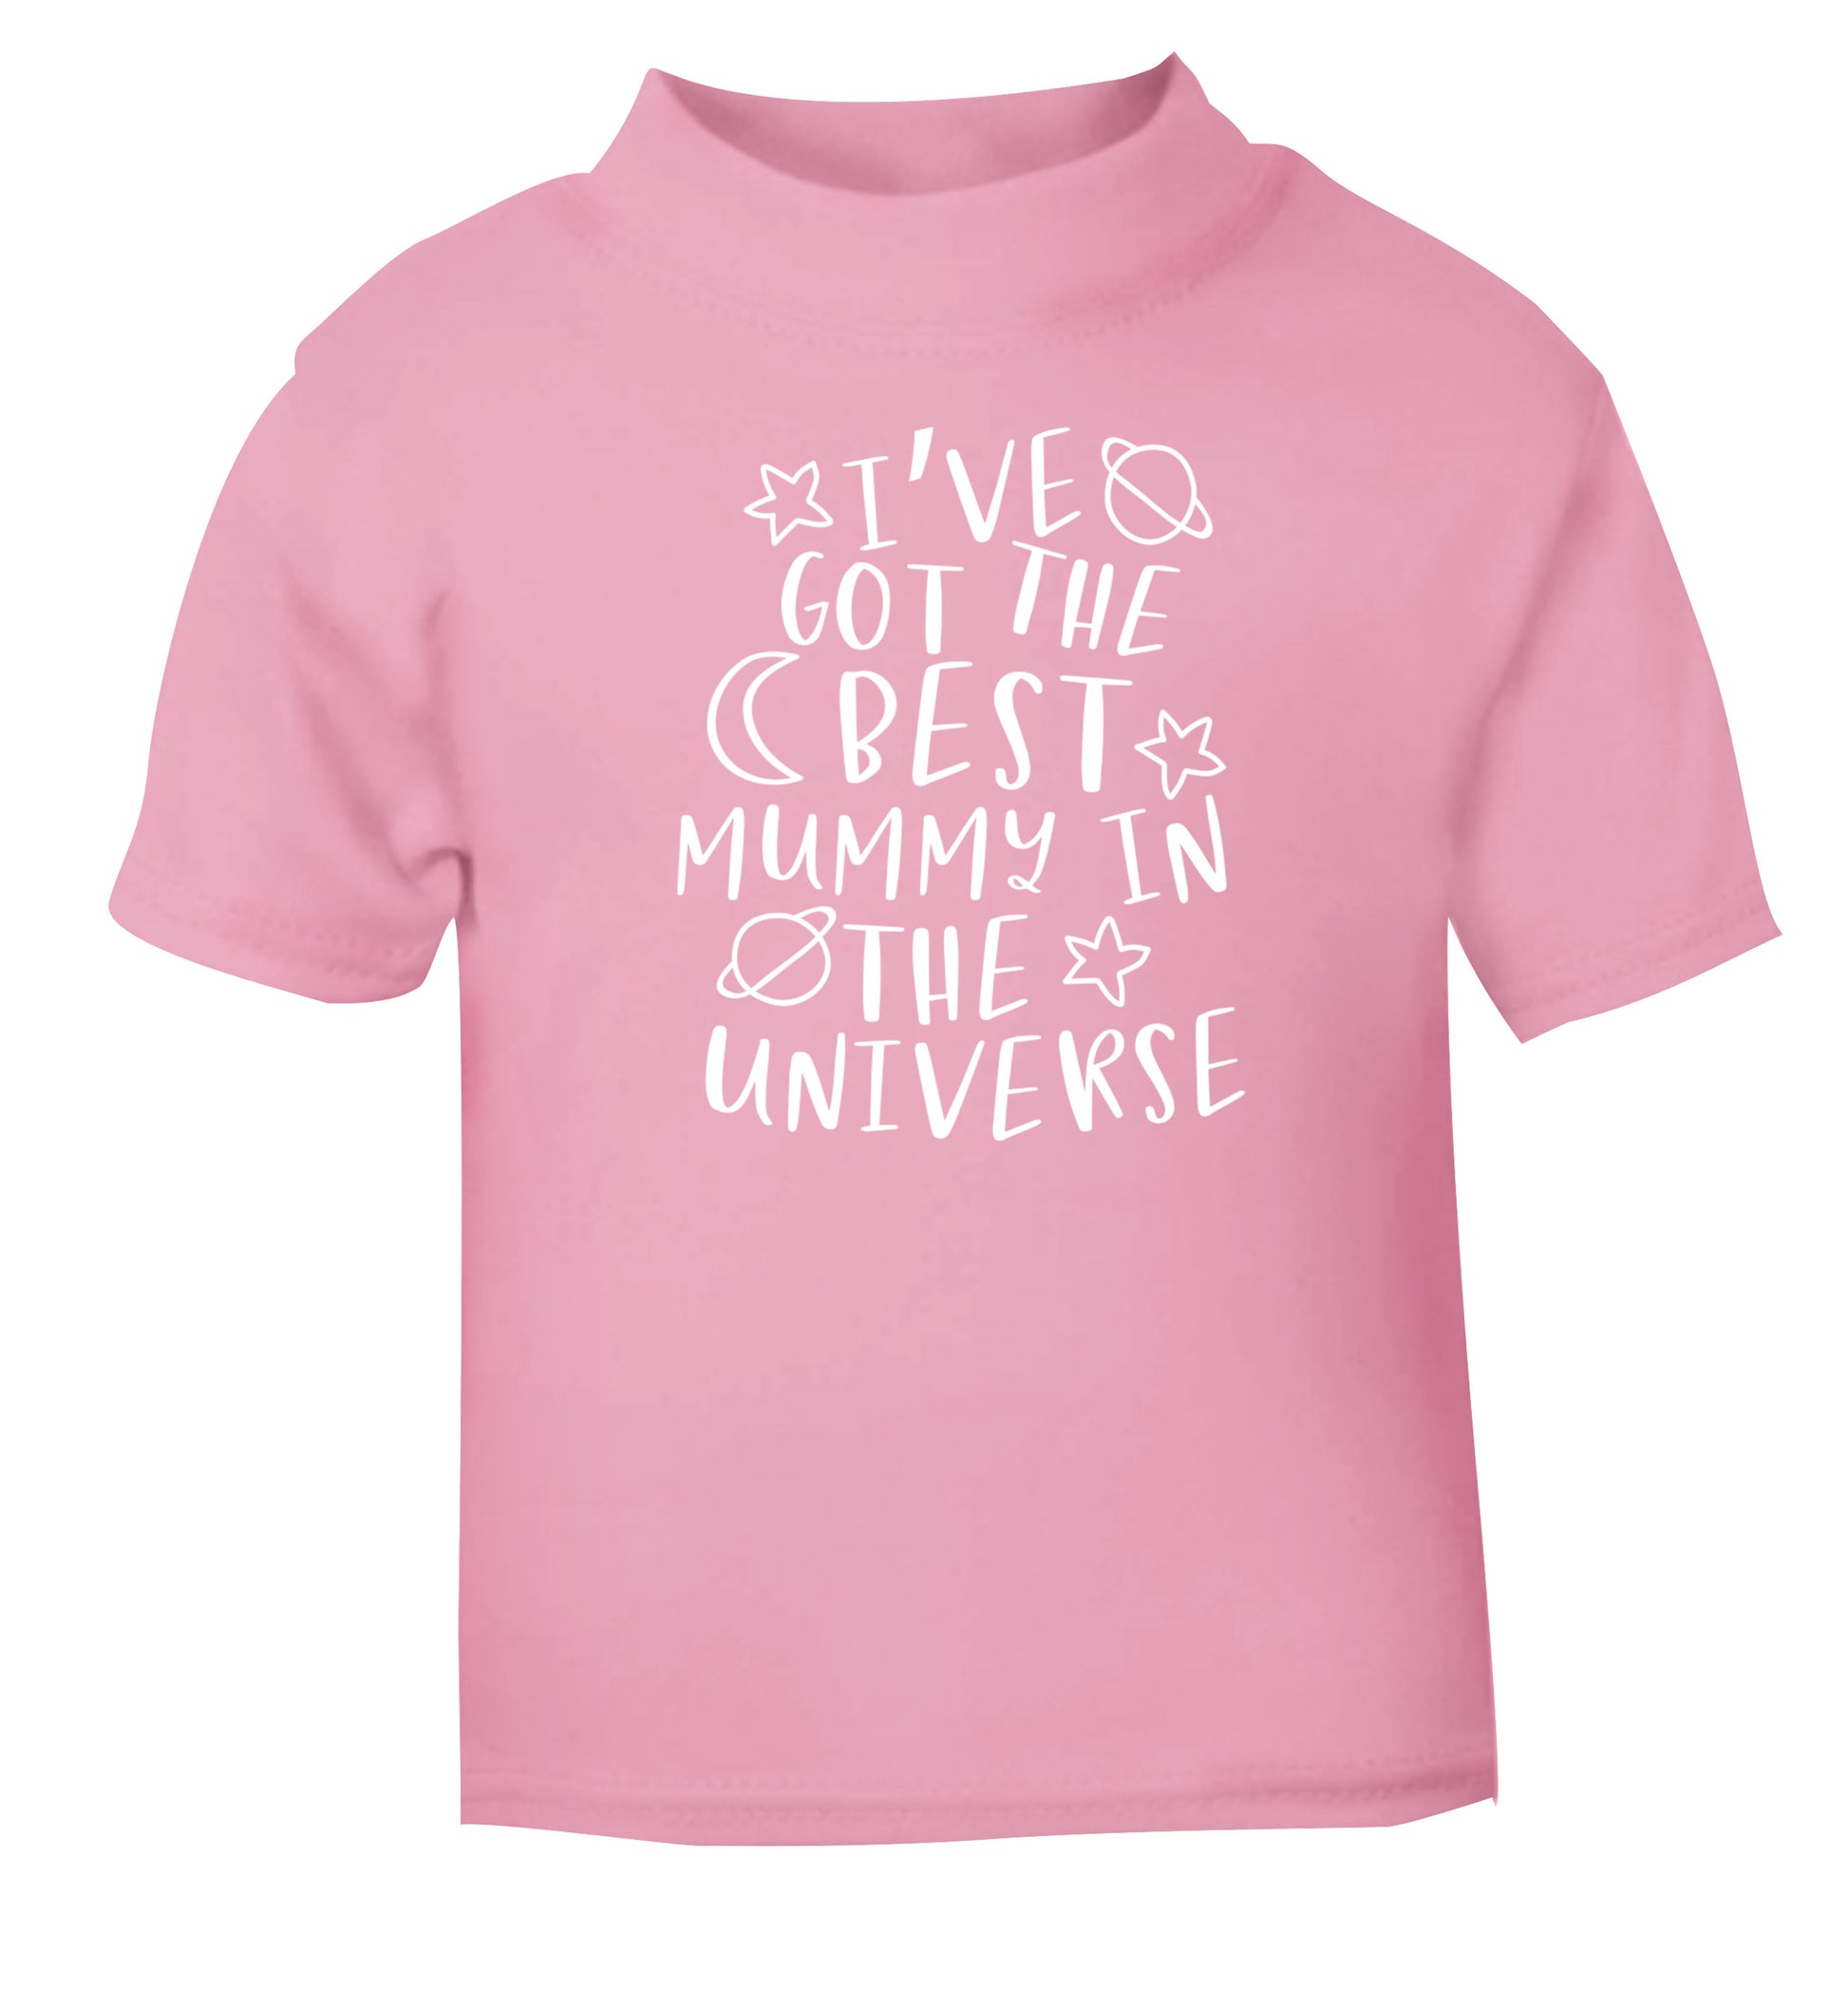 I've got the best mummy in the universe light pink baby toddler Tshirt 2 Years